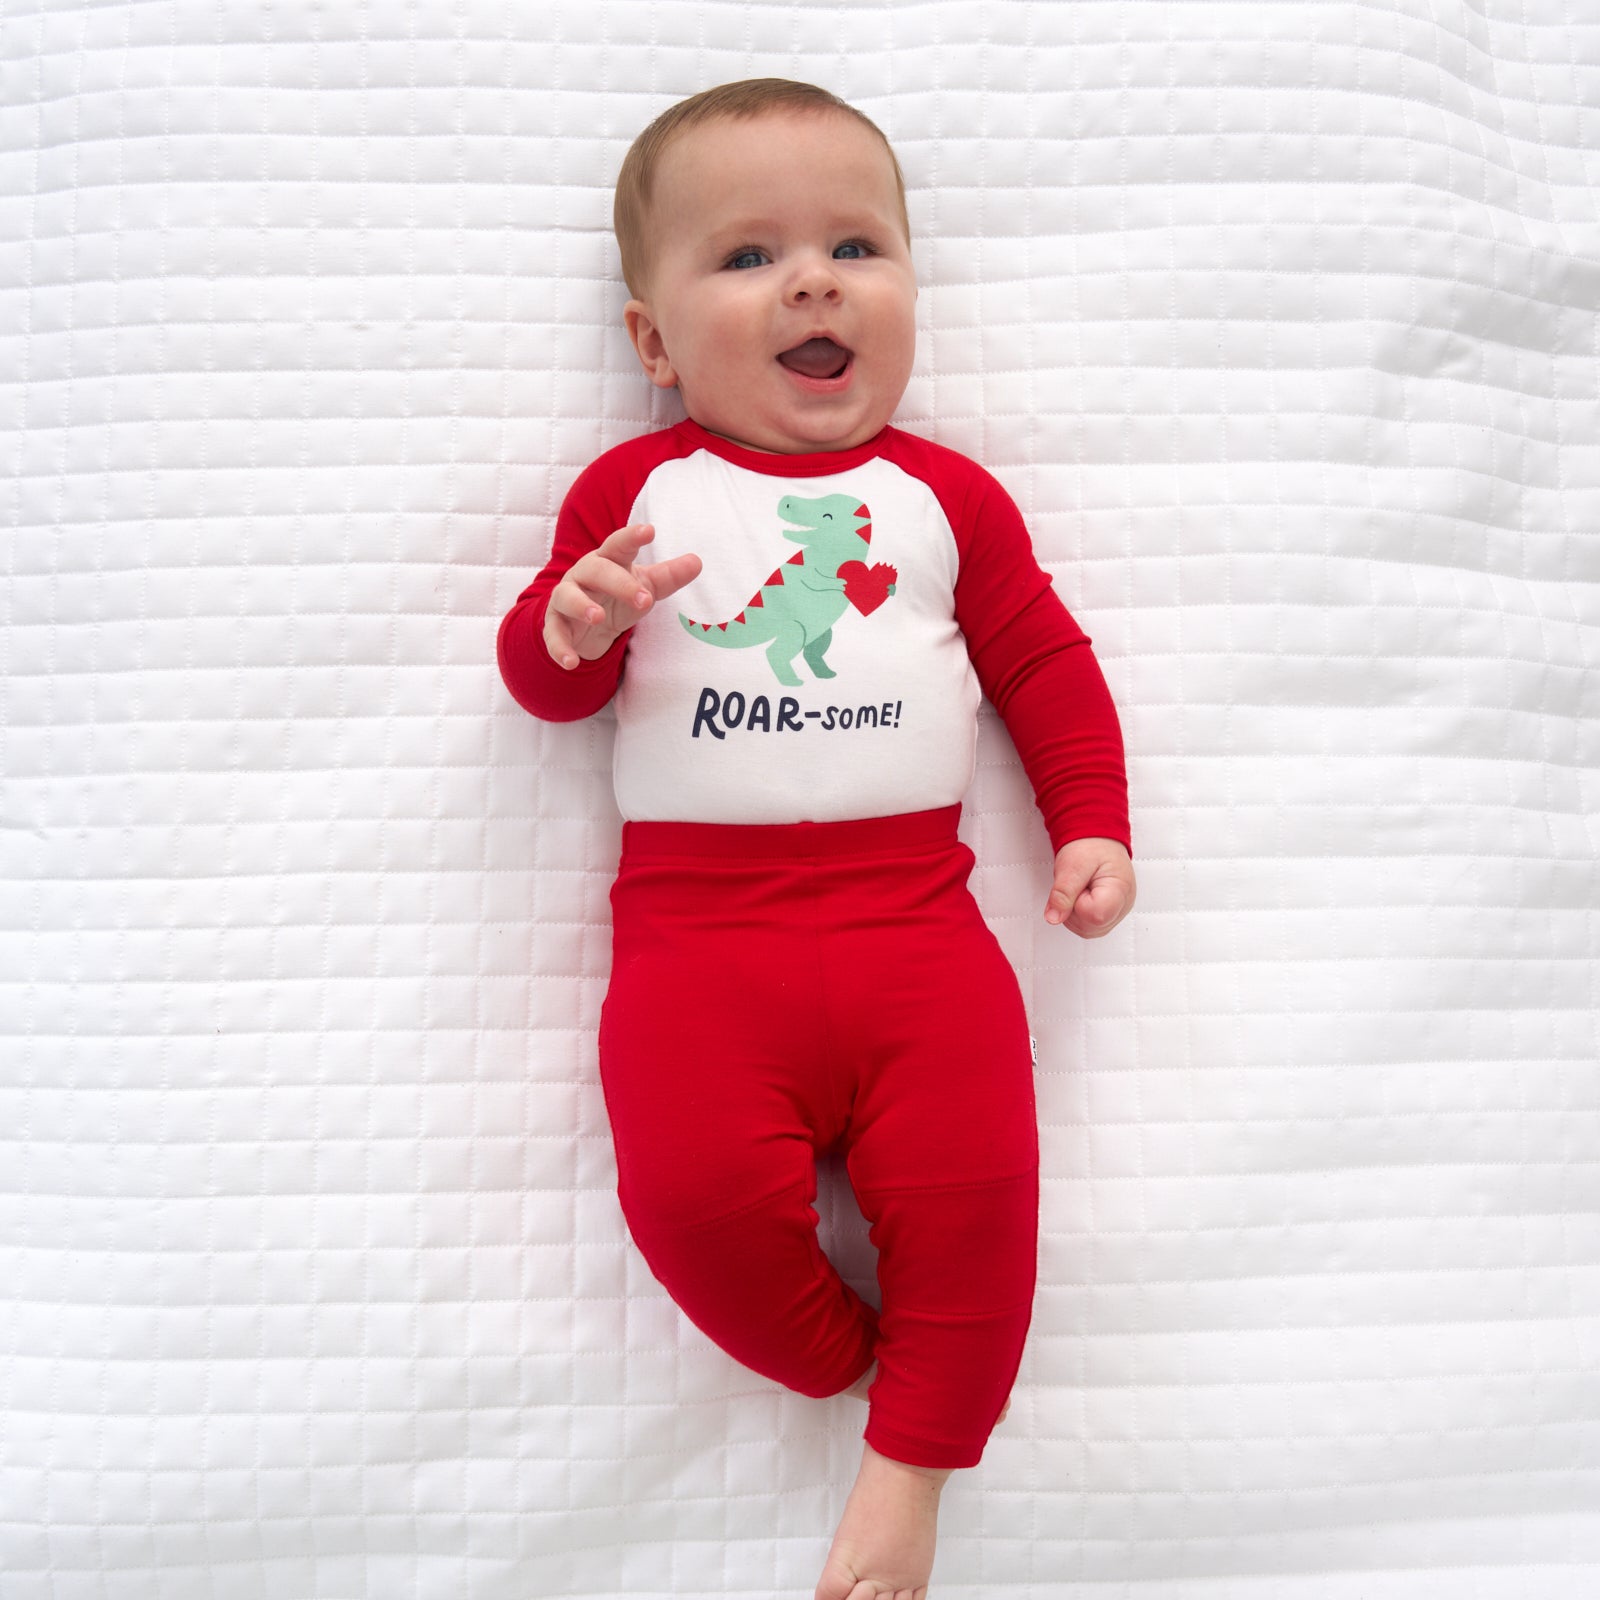 Child laying on a blanket wearing Candy Red leggings and a coordinating bodysuit